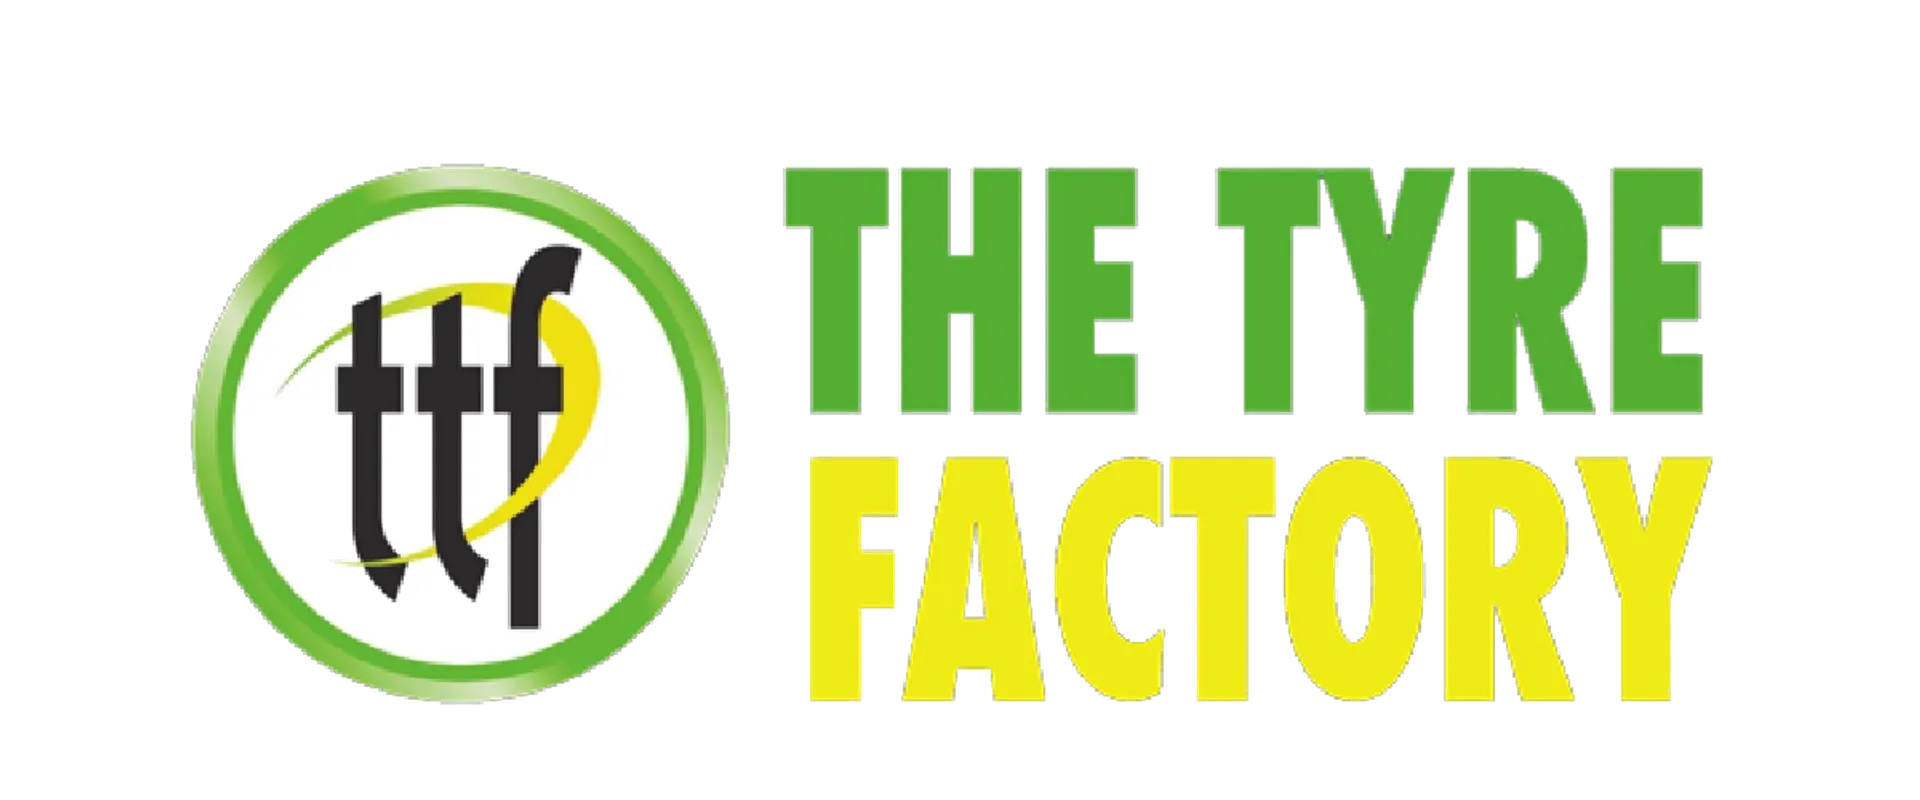 THE TYRE FACTORY logo of current catalogue